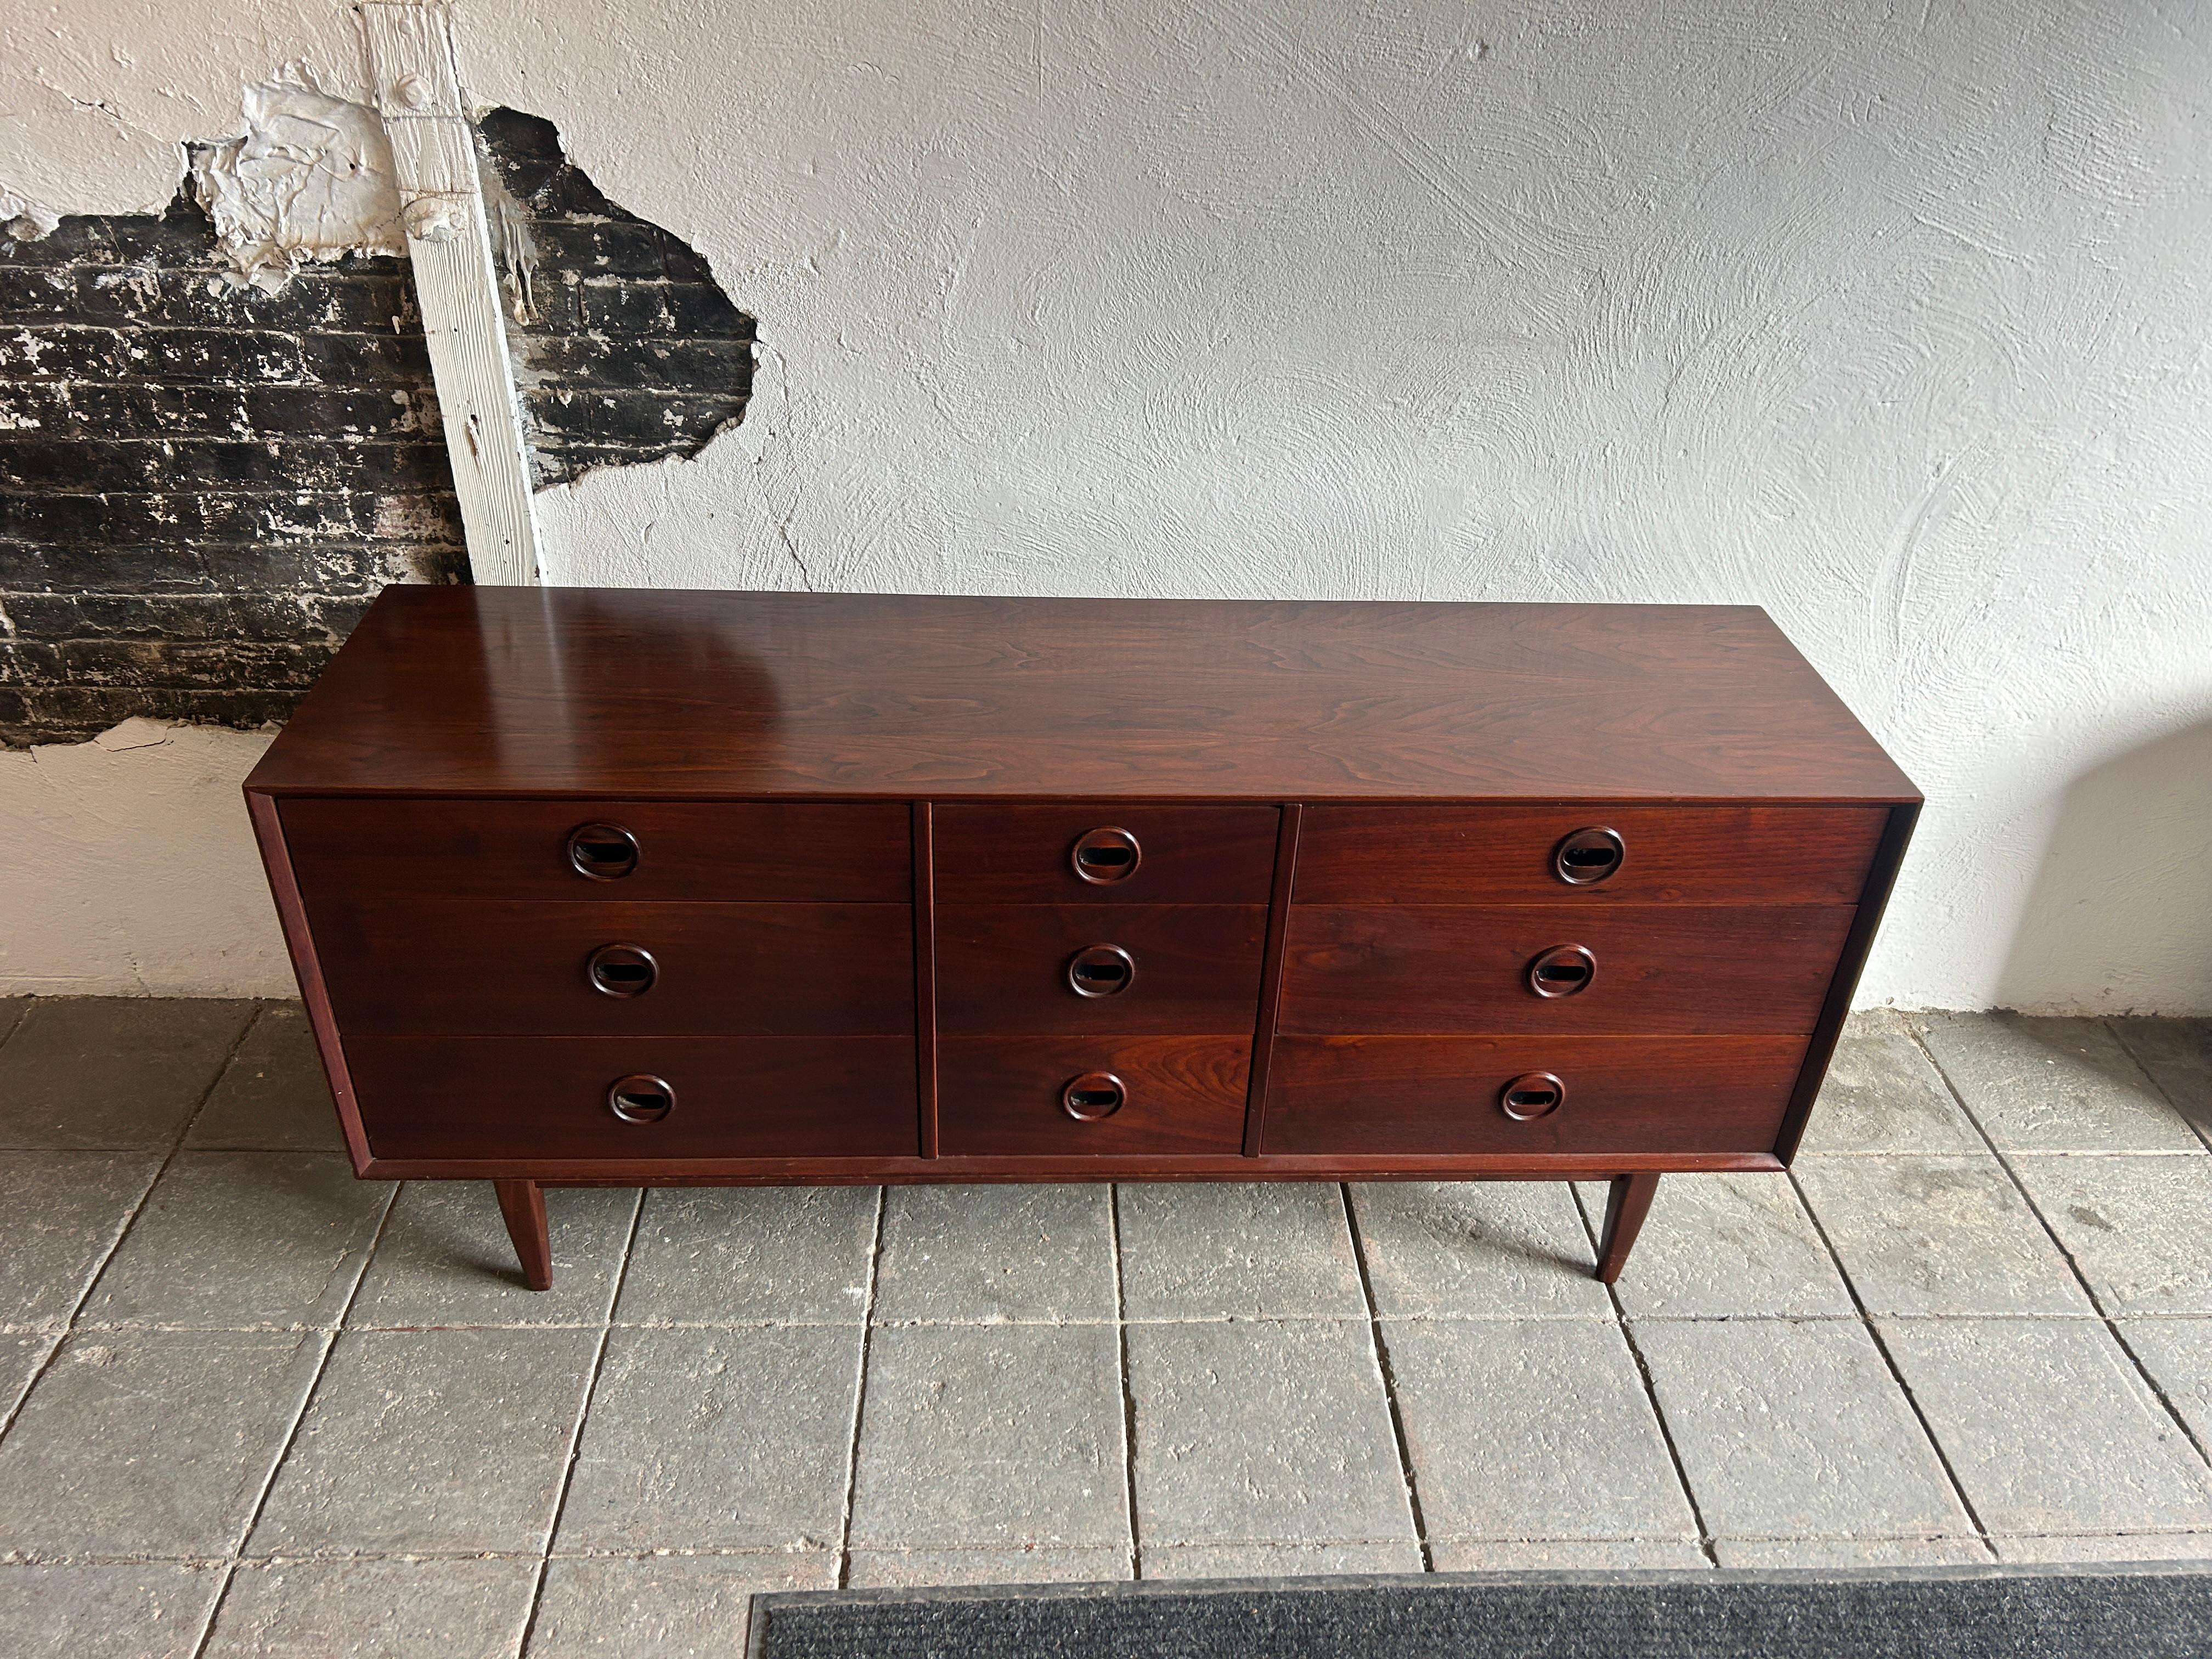 Unique mid century modern walnut 9 drawer dresser with carved handles. Dark reddish walnut wood Danish rosewood style with circular eye carved handle / Pulls. Dovetail solid oak drawer construction. Beautiful wood grain. Made in USA circa 1960.